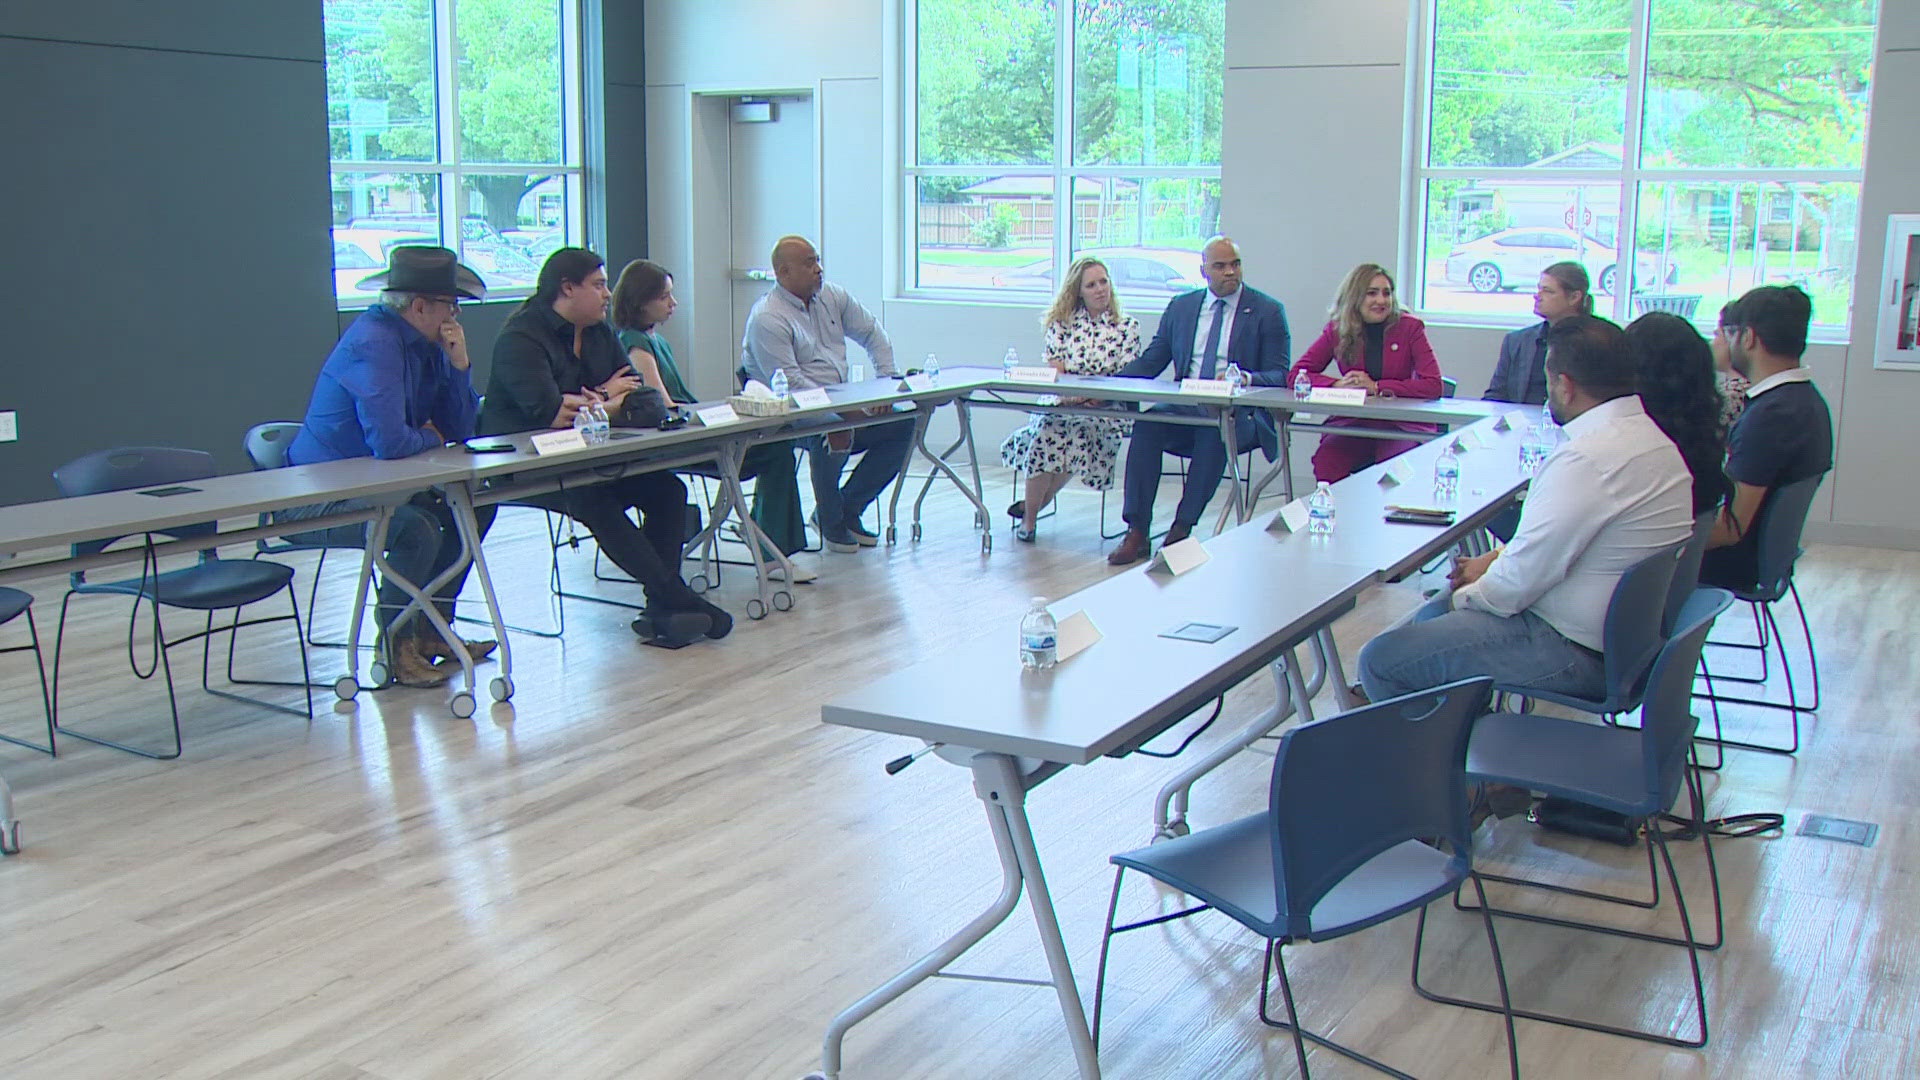 As the one-year anniversary of the shooting approaches survivors, first responders and lawmakers held a roundtable to discuss how to end gun violence.